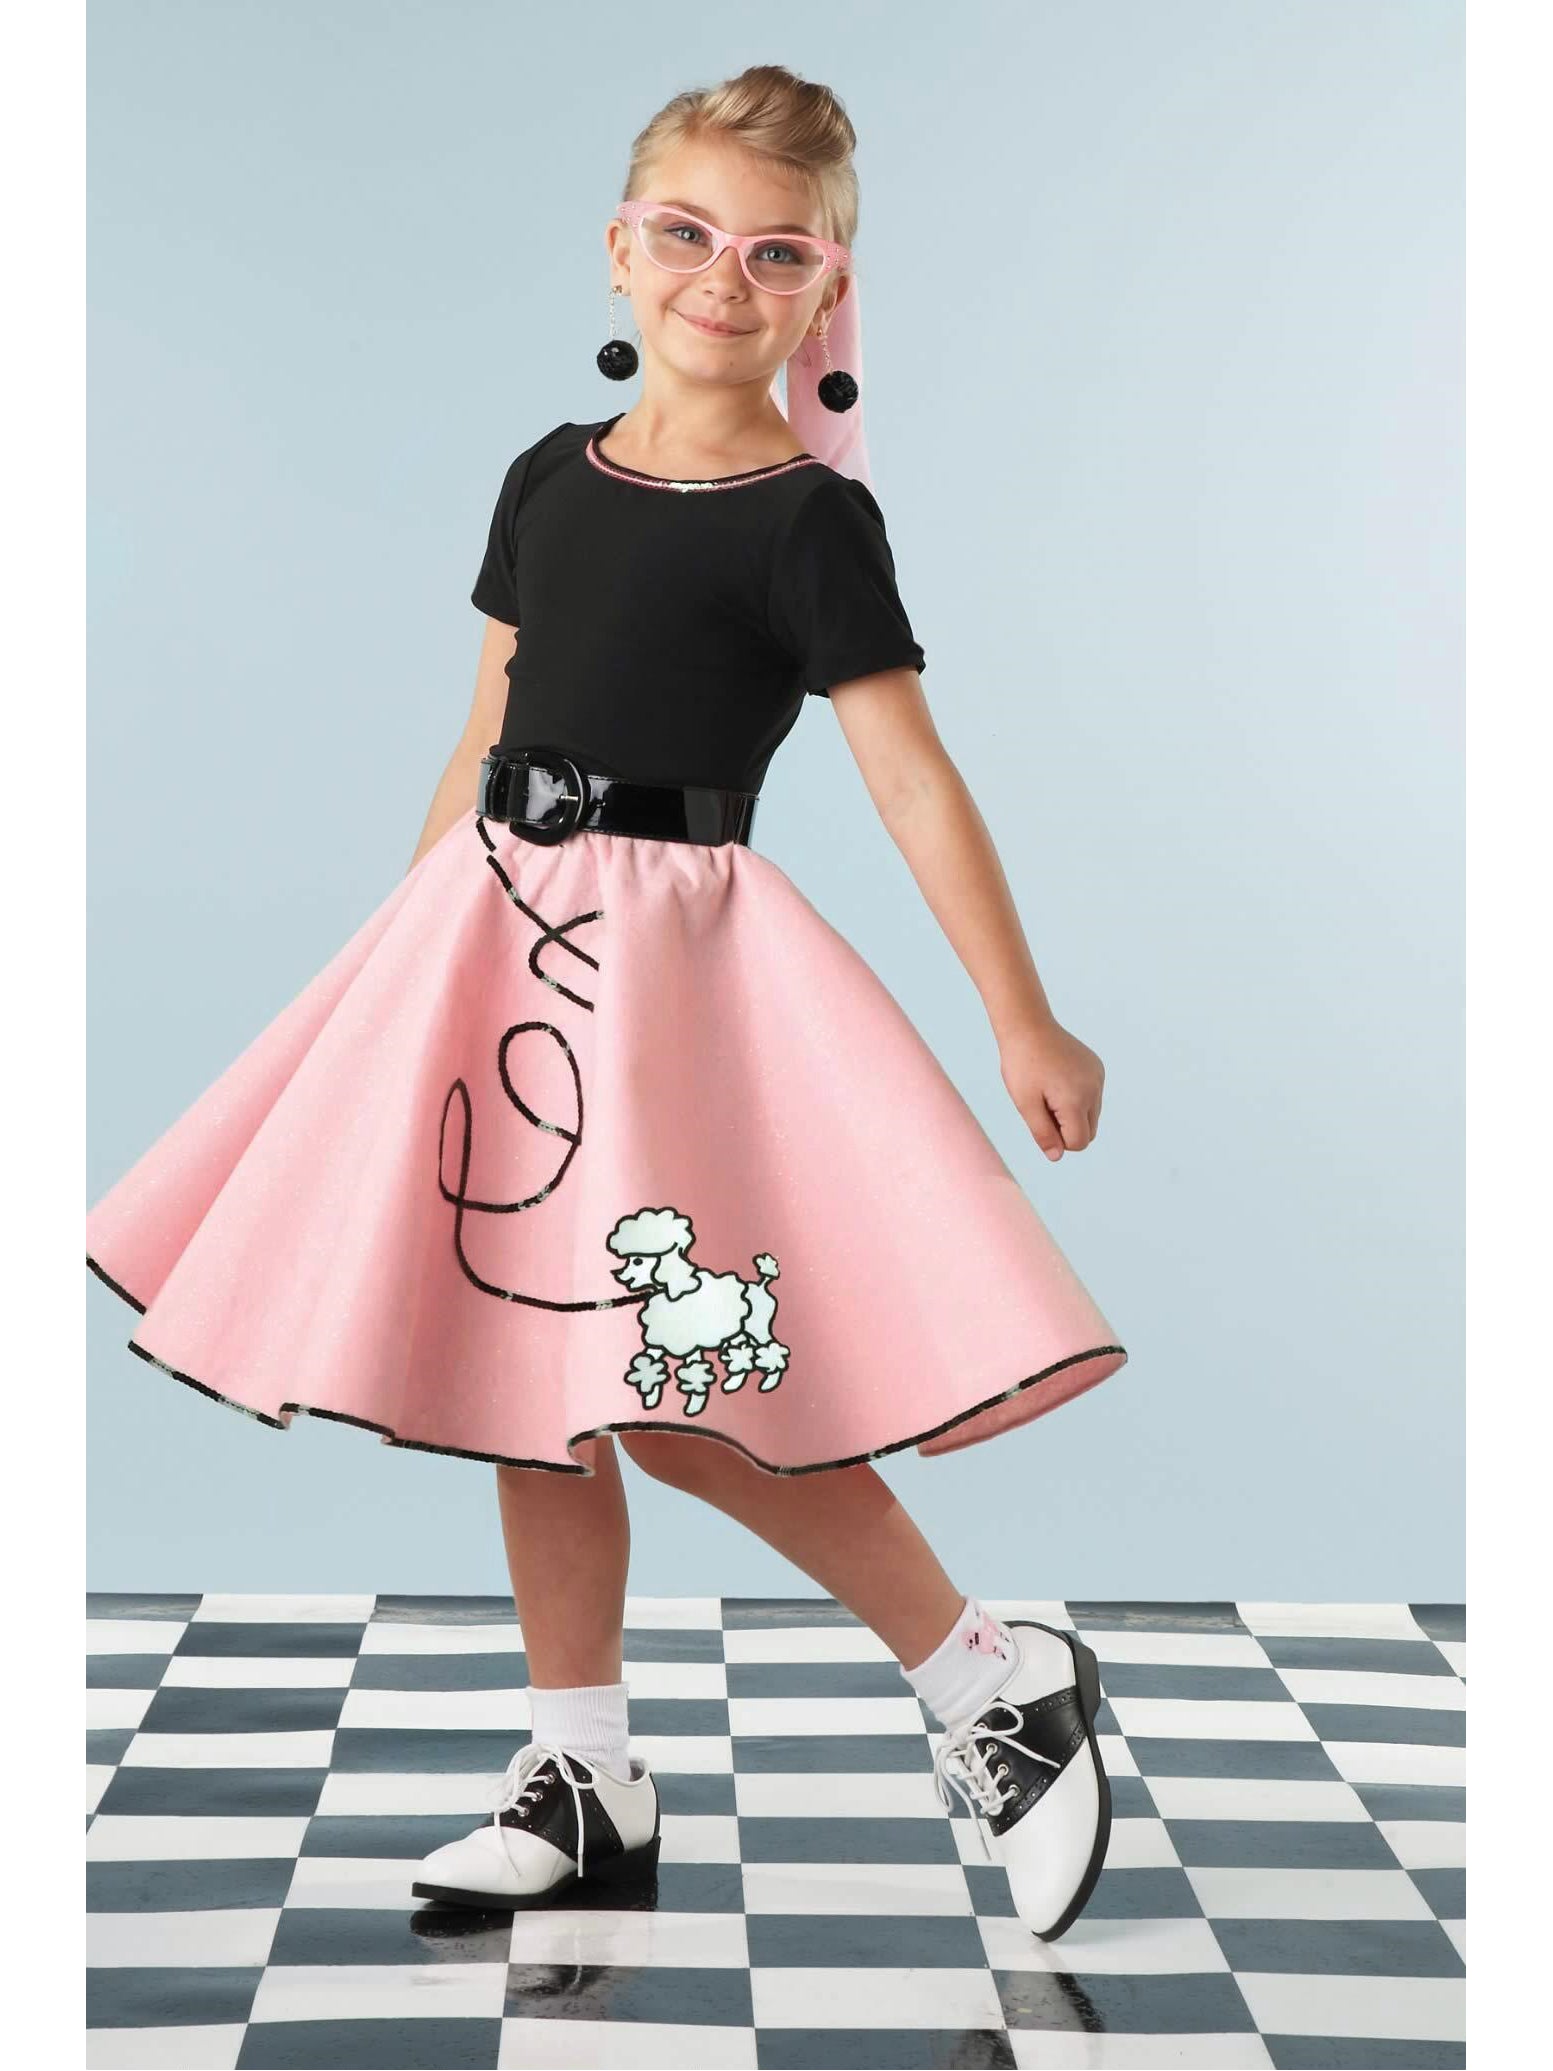 Fab '50s Costume For Girls  pin alt1